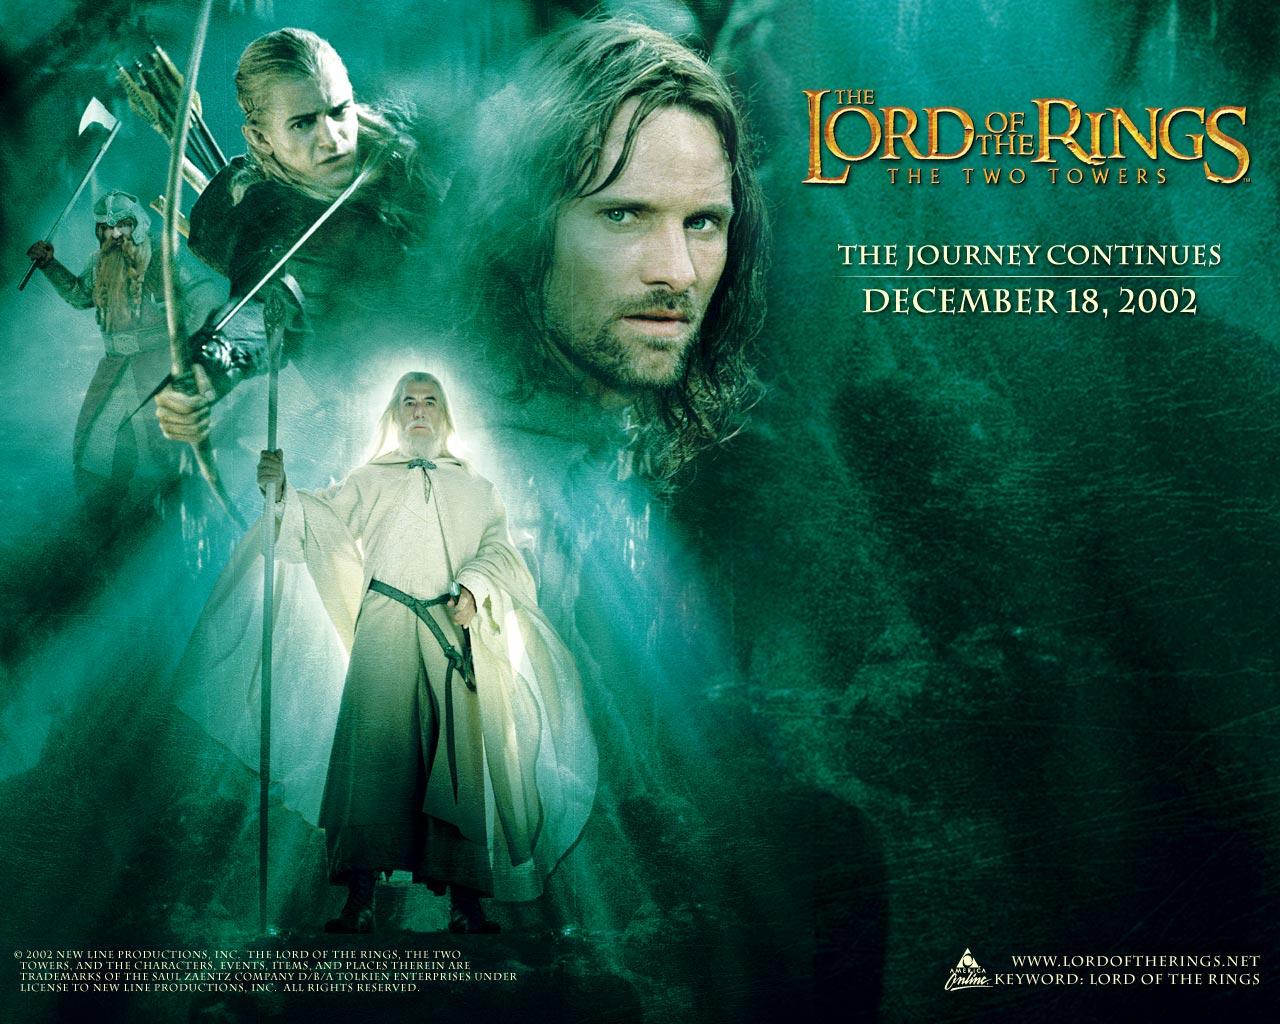 Wallpaper The Lord of the Rings The Lord of the Rings The Two Towers